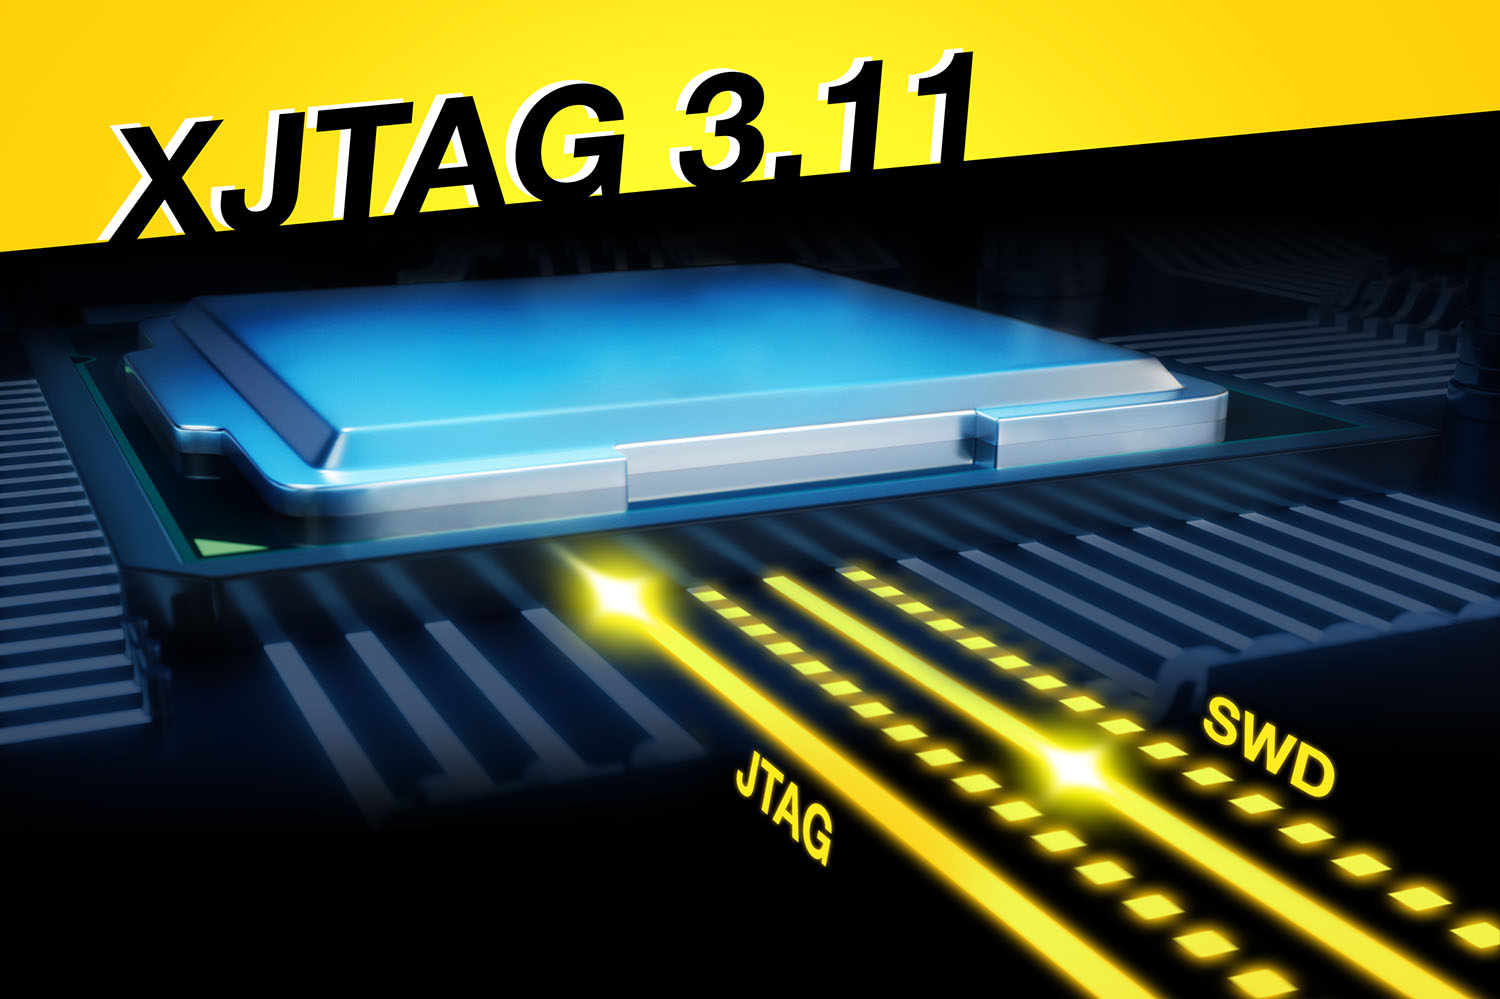 XJTAG Version 3.11 supports SWD (JTAG Boundary Scan)